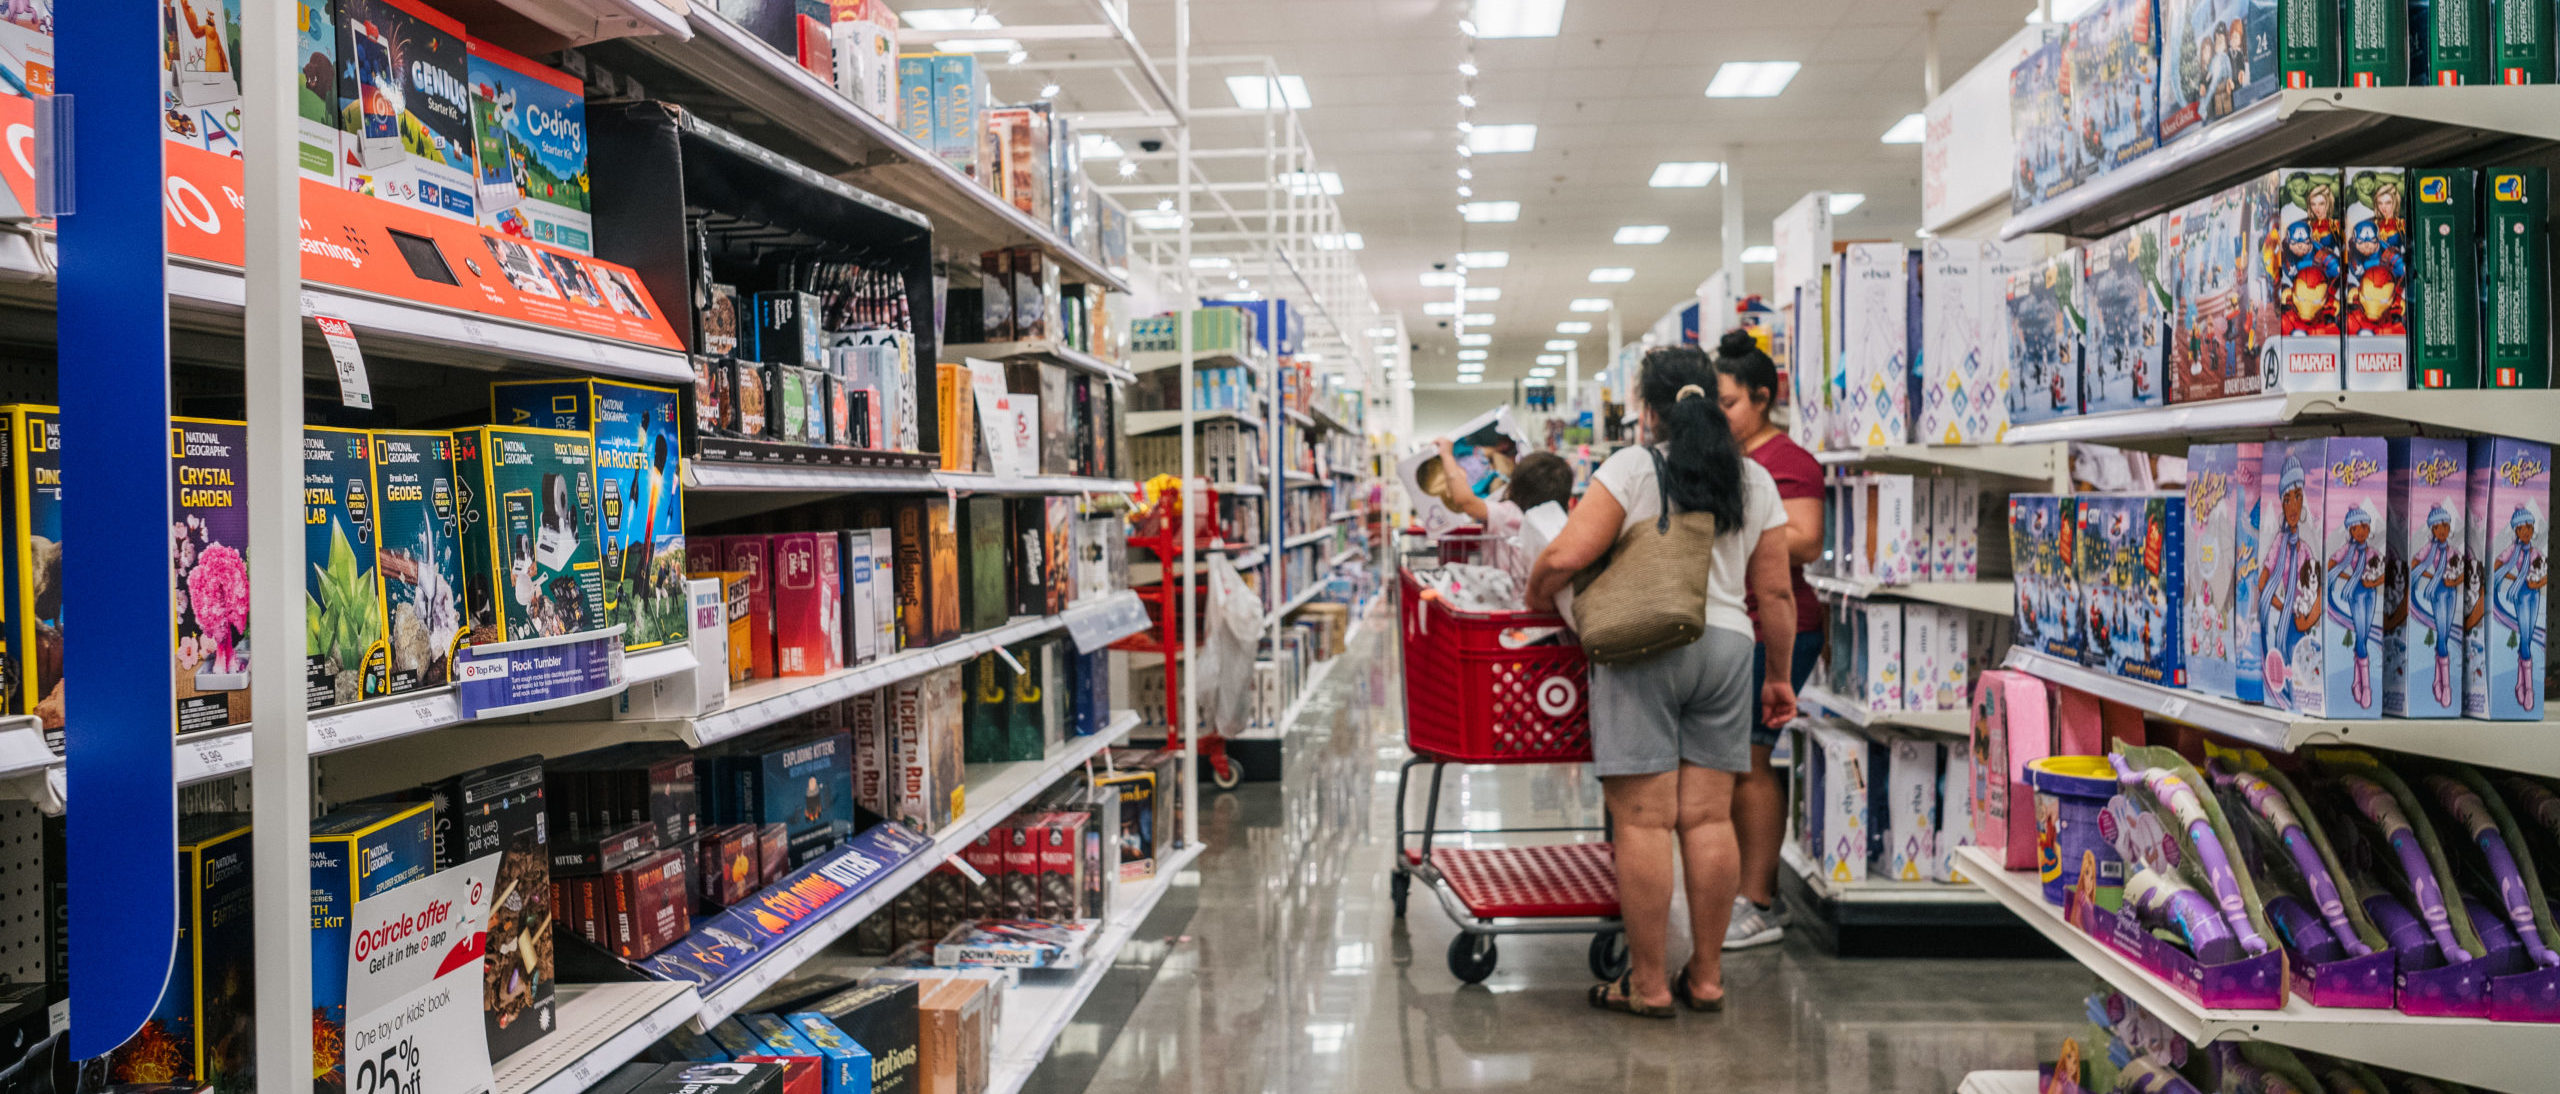 HOUSTON, TEXAS - OCTOBER 25: A family shops for toys at a Target store on October 25, 2021 in Houston, Texas. (Photo by Brandon Bell/Getty Images)